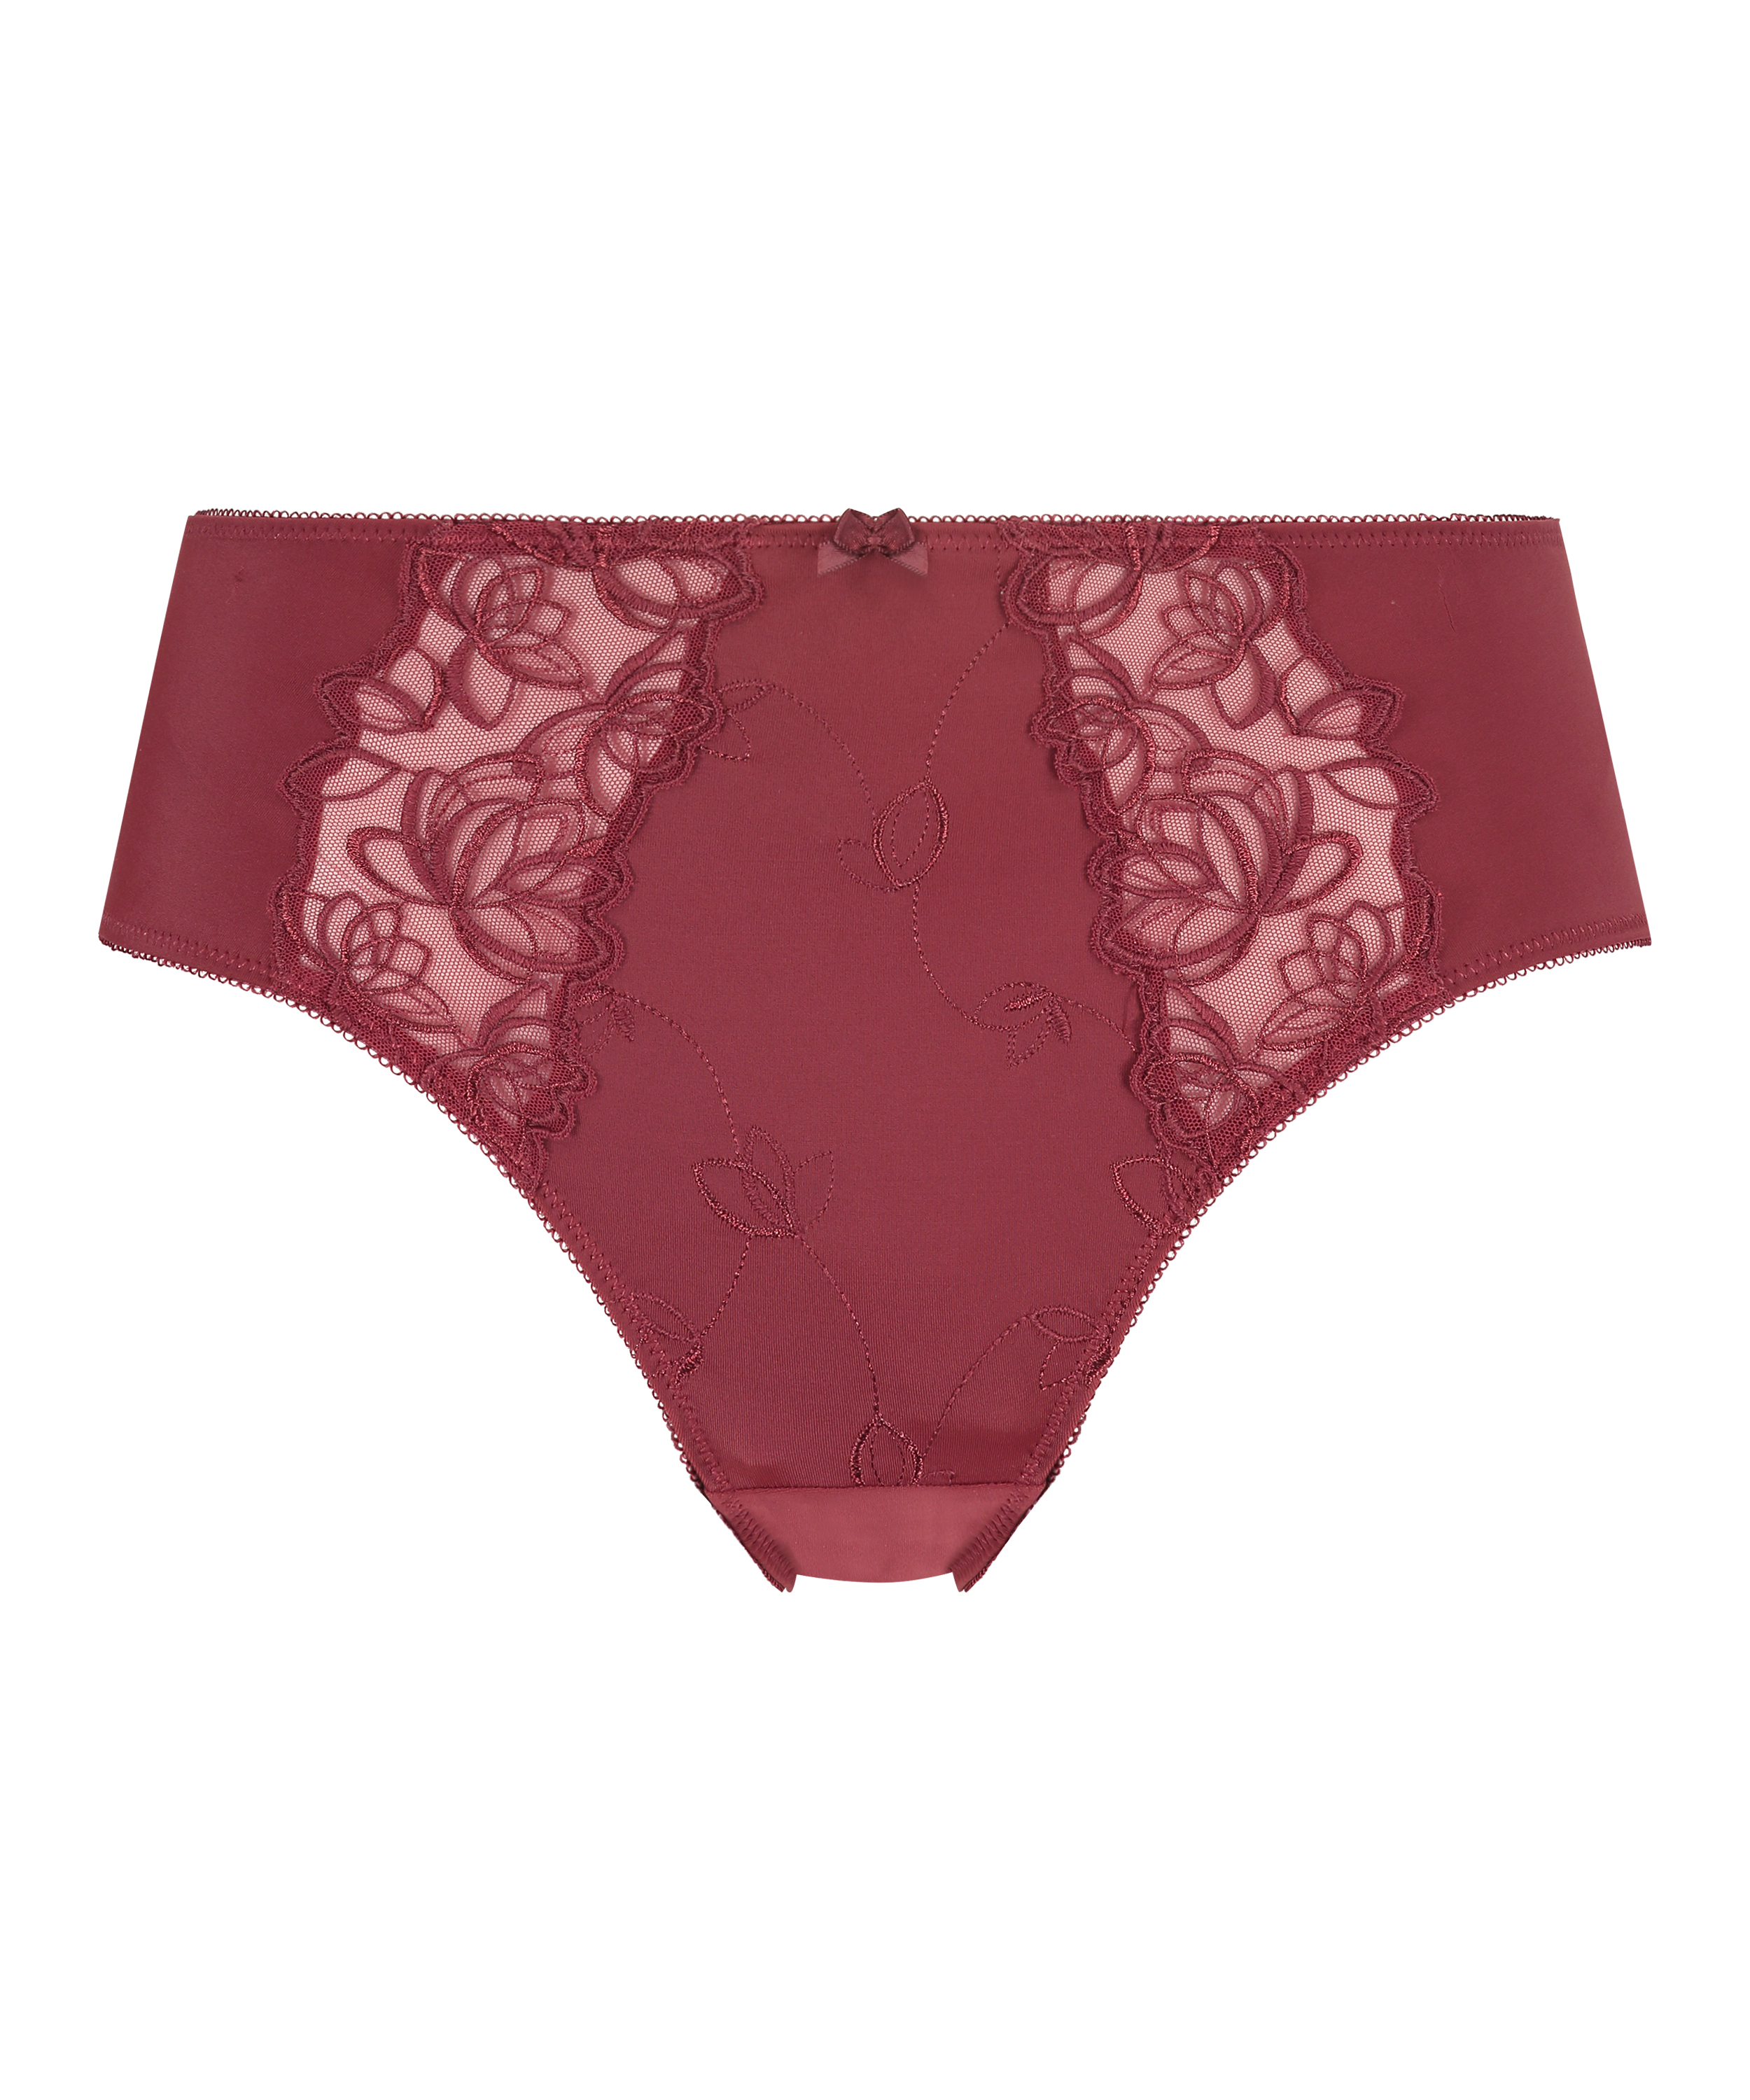 Diva high knickers, Red, main